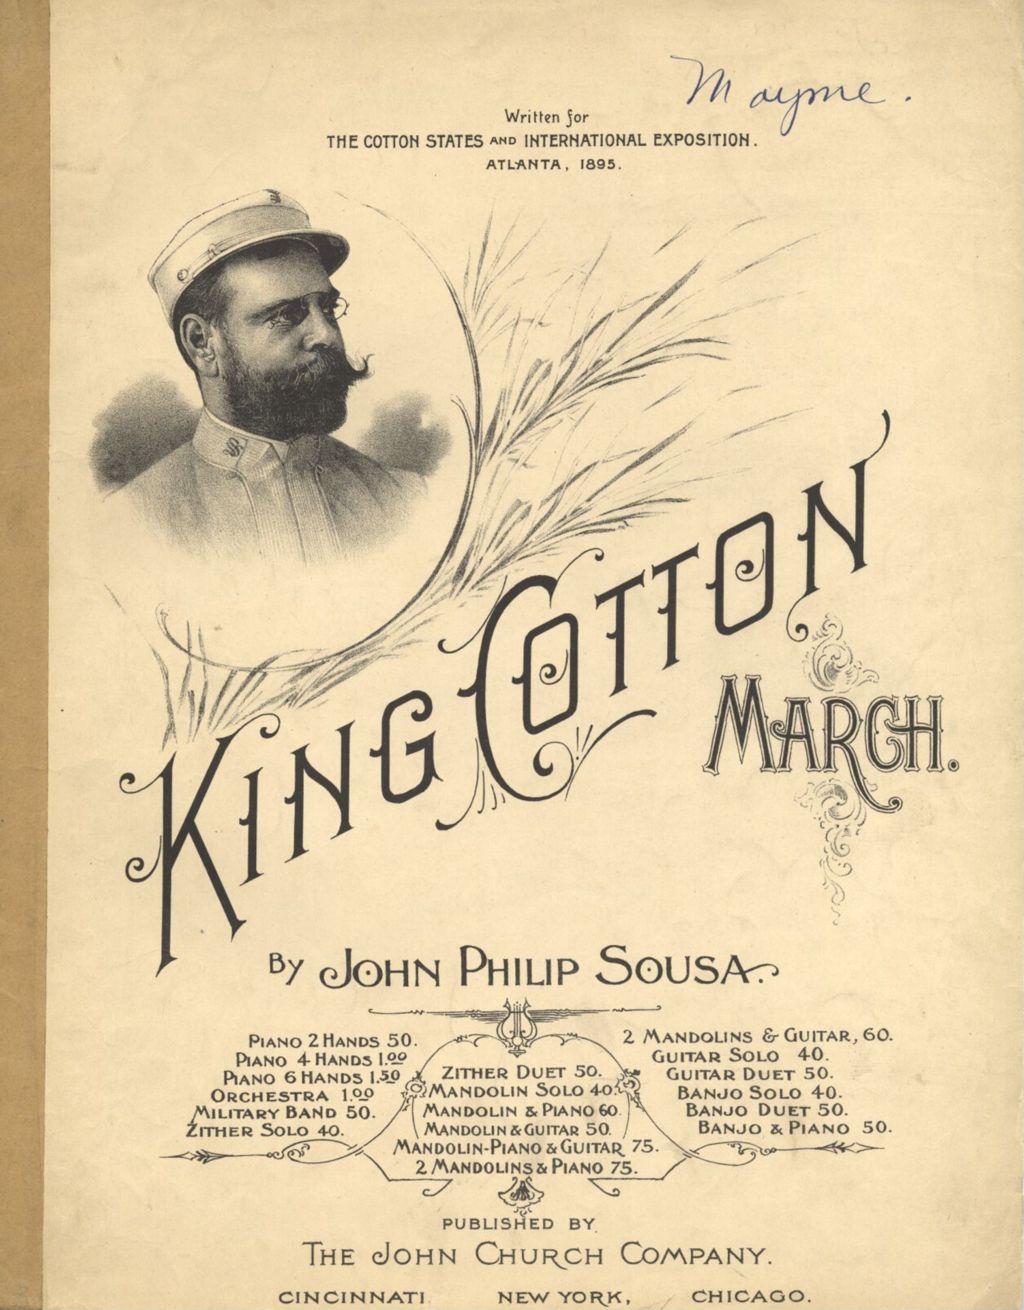 Miniature of King Cotton (March)